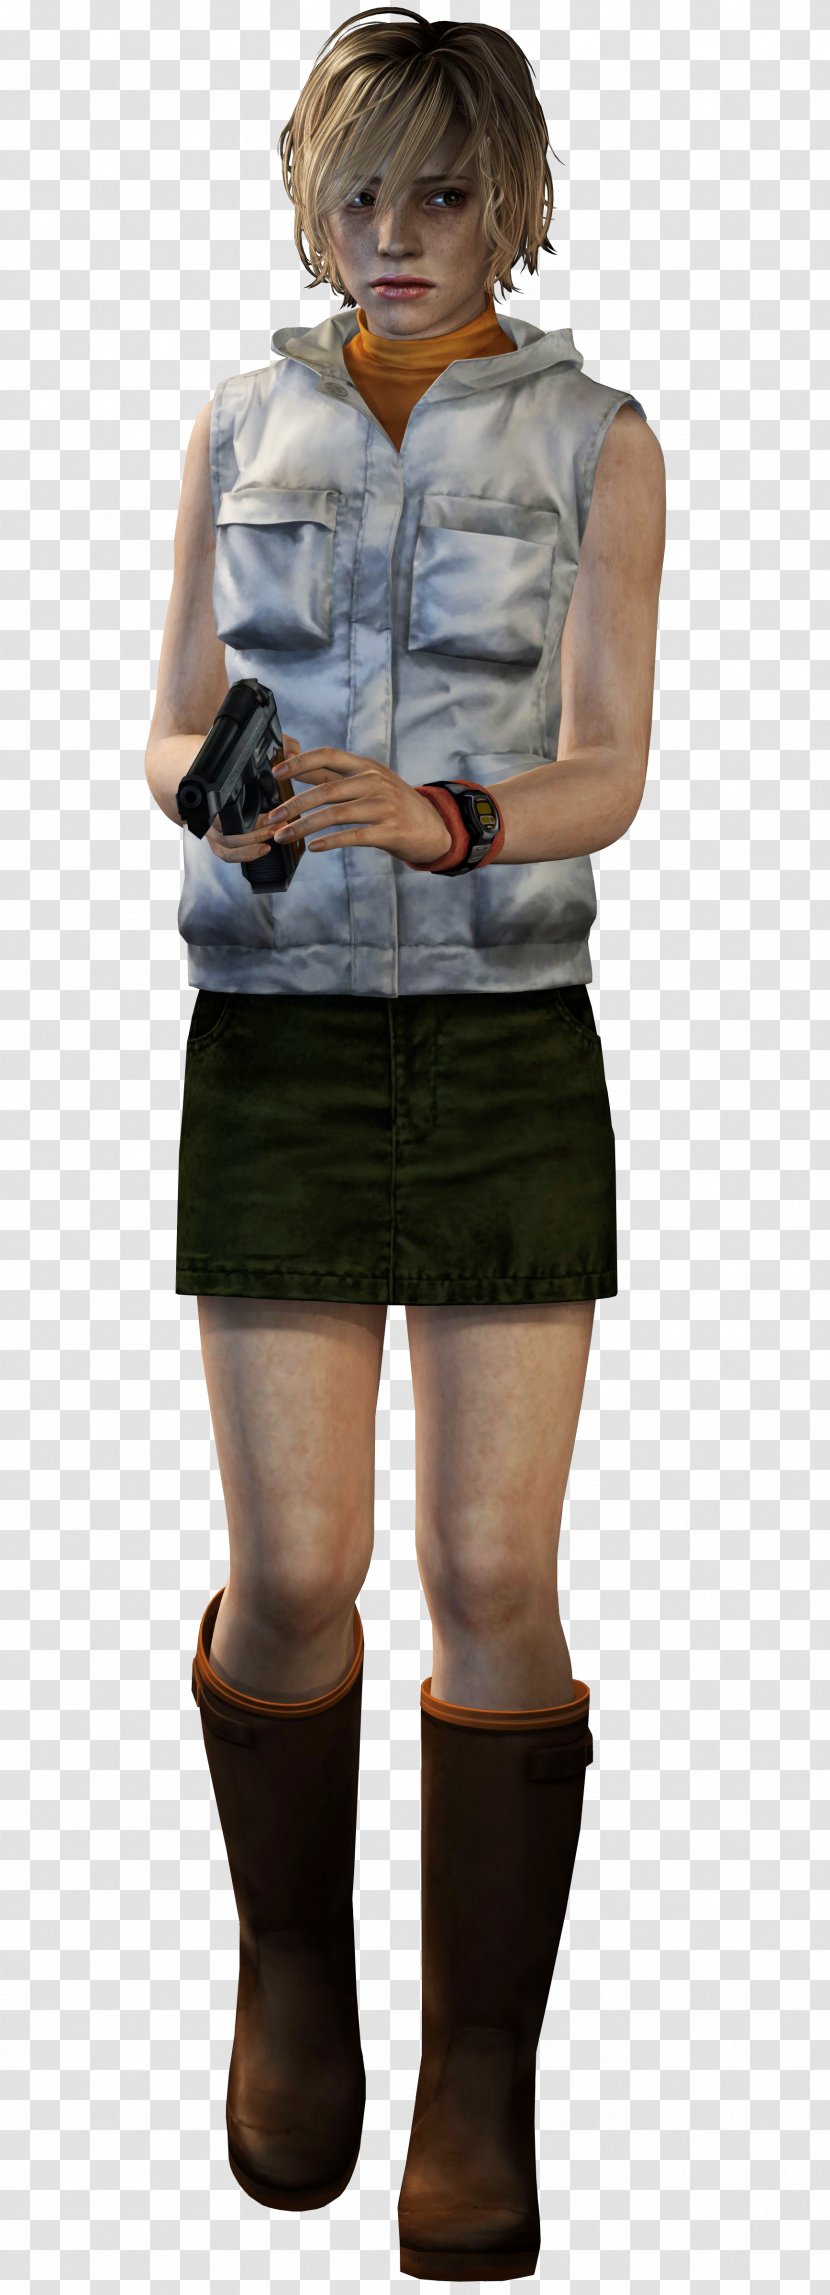 Silent Hill 3 Heather Mason 2 Alessa Gillespie - Heart - Colossus Of Rhodes Transparent PNG